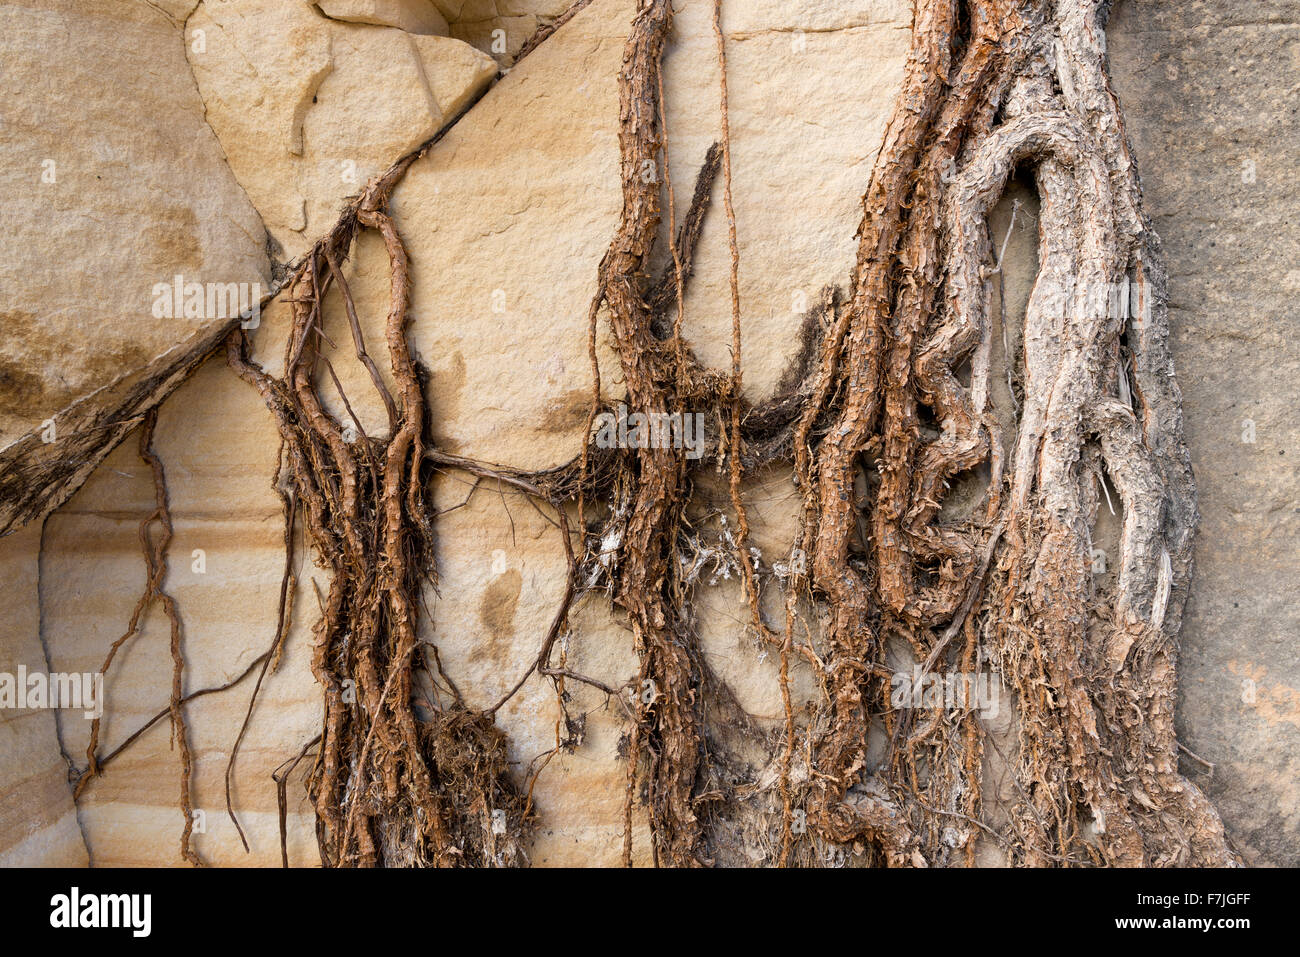 Exposed tree roots, Hovenweep National Monument, Colorado. Stock Photo